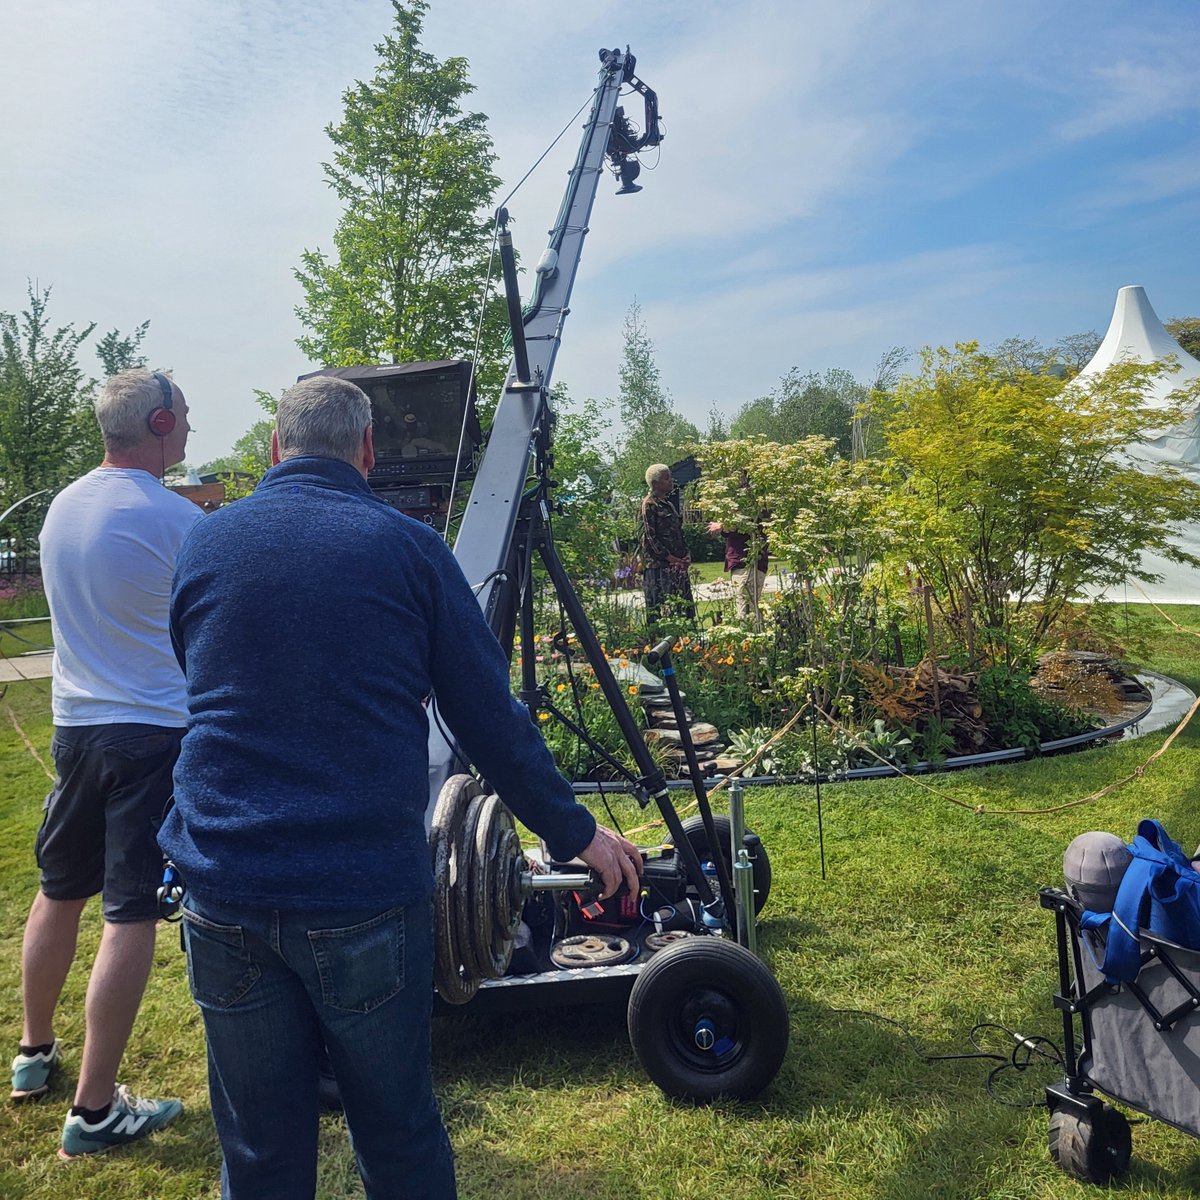 We're busy filming at the RHS Malvern Spring Festival this week and the weather has been glorious so far! Find out what caught our attention this Friday at 8pm on @BBCTwo 😎 #GardenersWorld #RHSMalvern